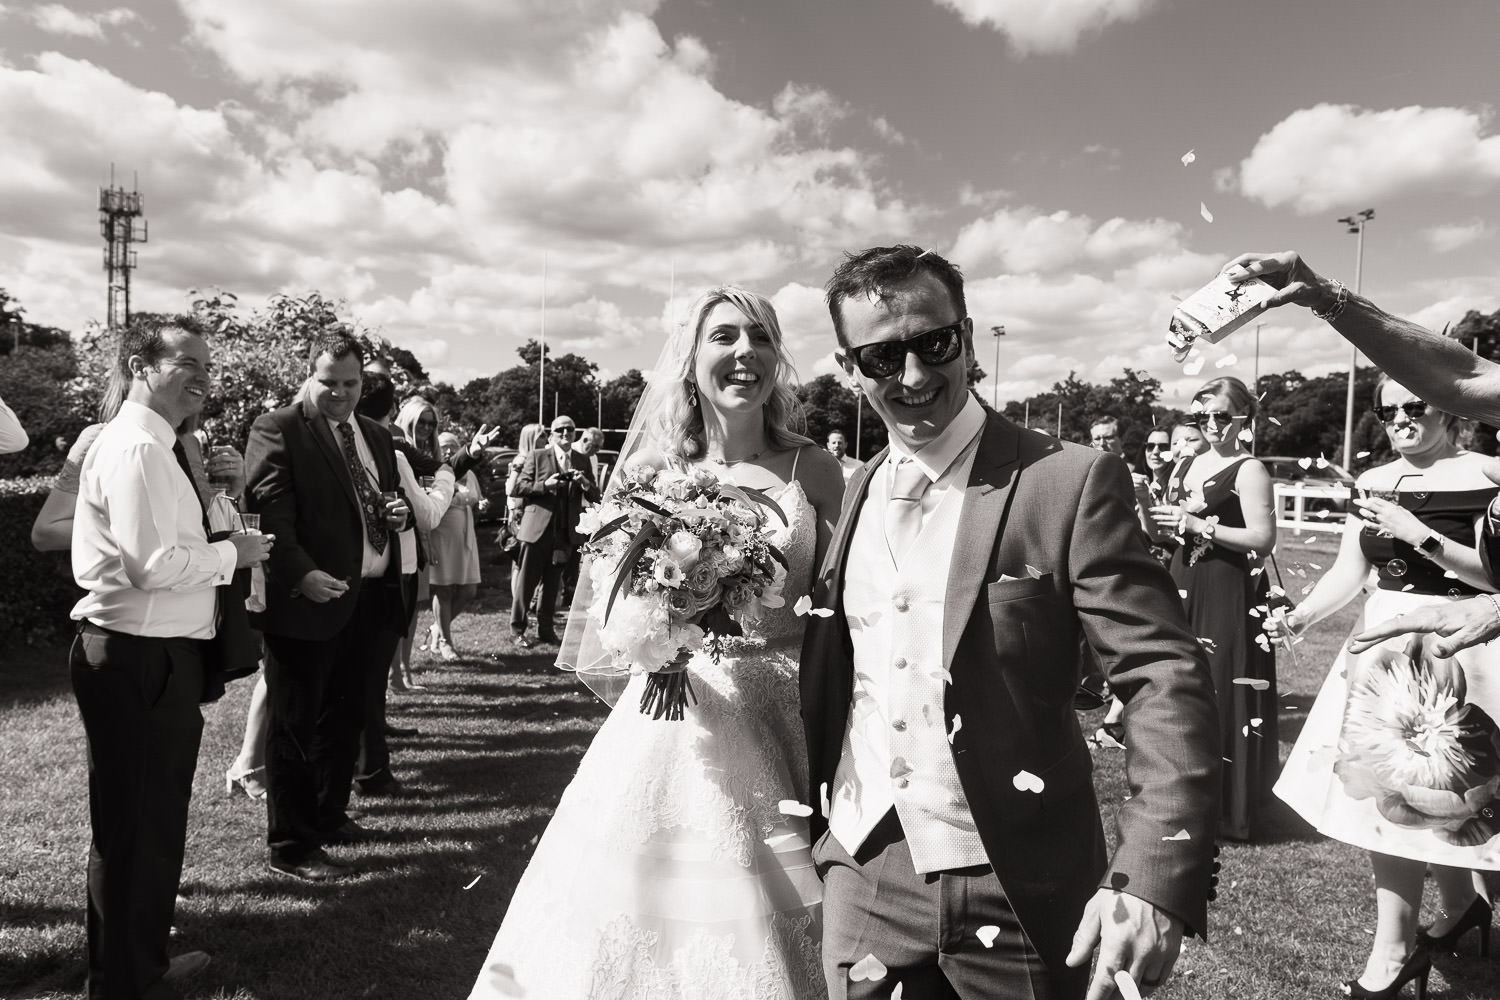 Newly married couple arriving at The Cobham Curve for their wedding reception. Their guests throwing confetti over them as they walk past. It's a sunny day with blue skies. Woman wears Allure Bridals ball gown. Groom is wearing a suit and sunglasses.